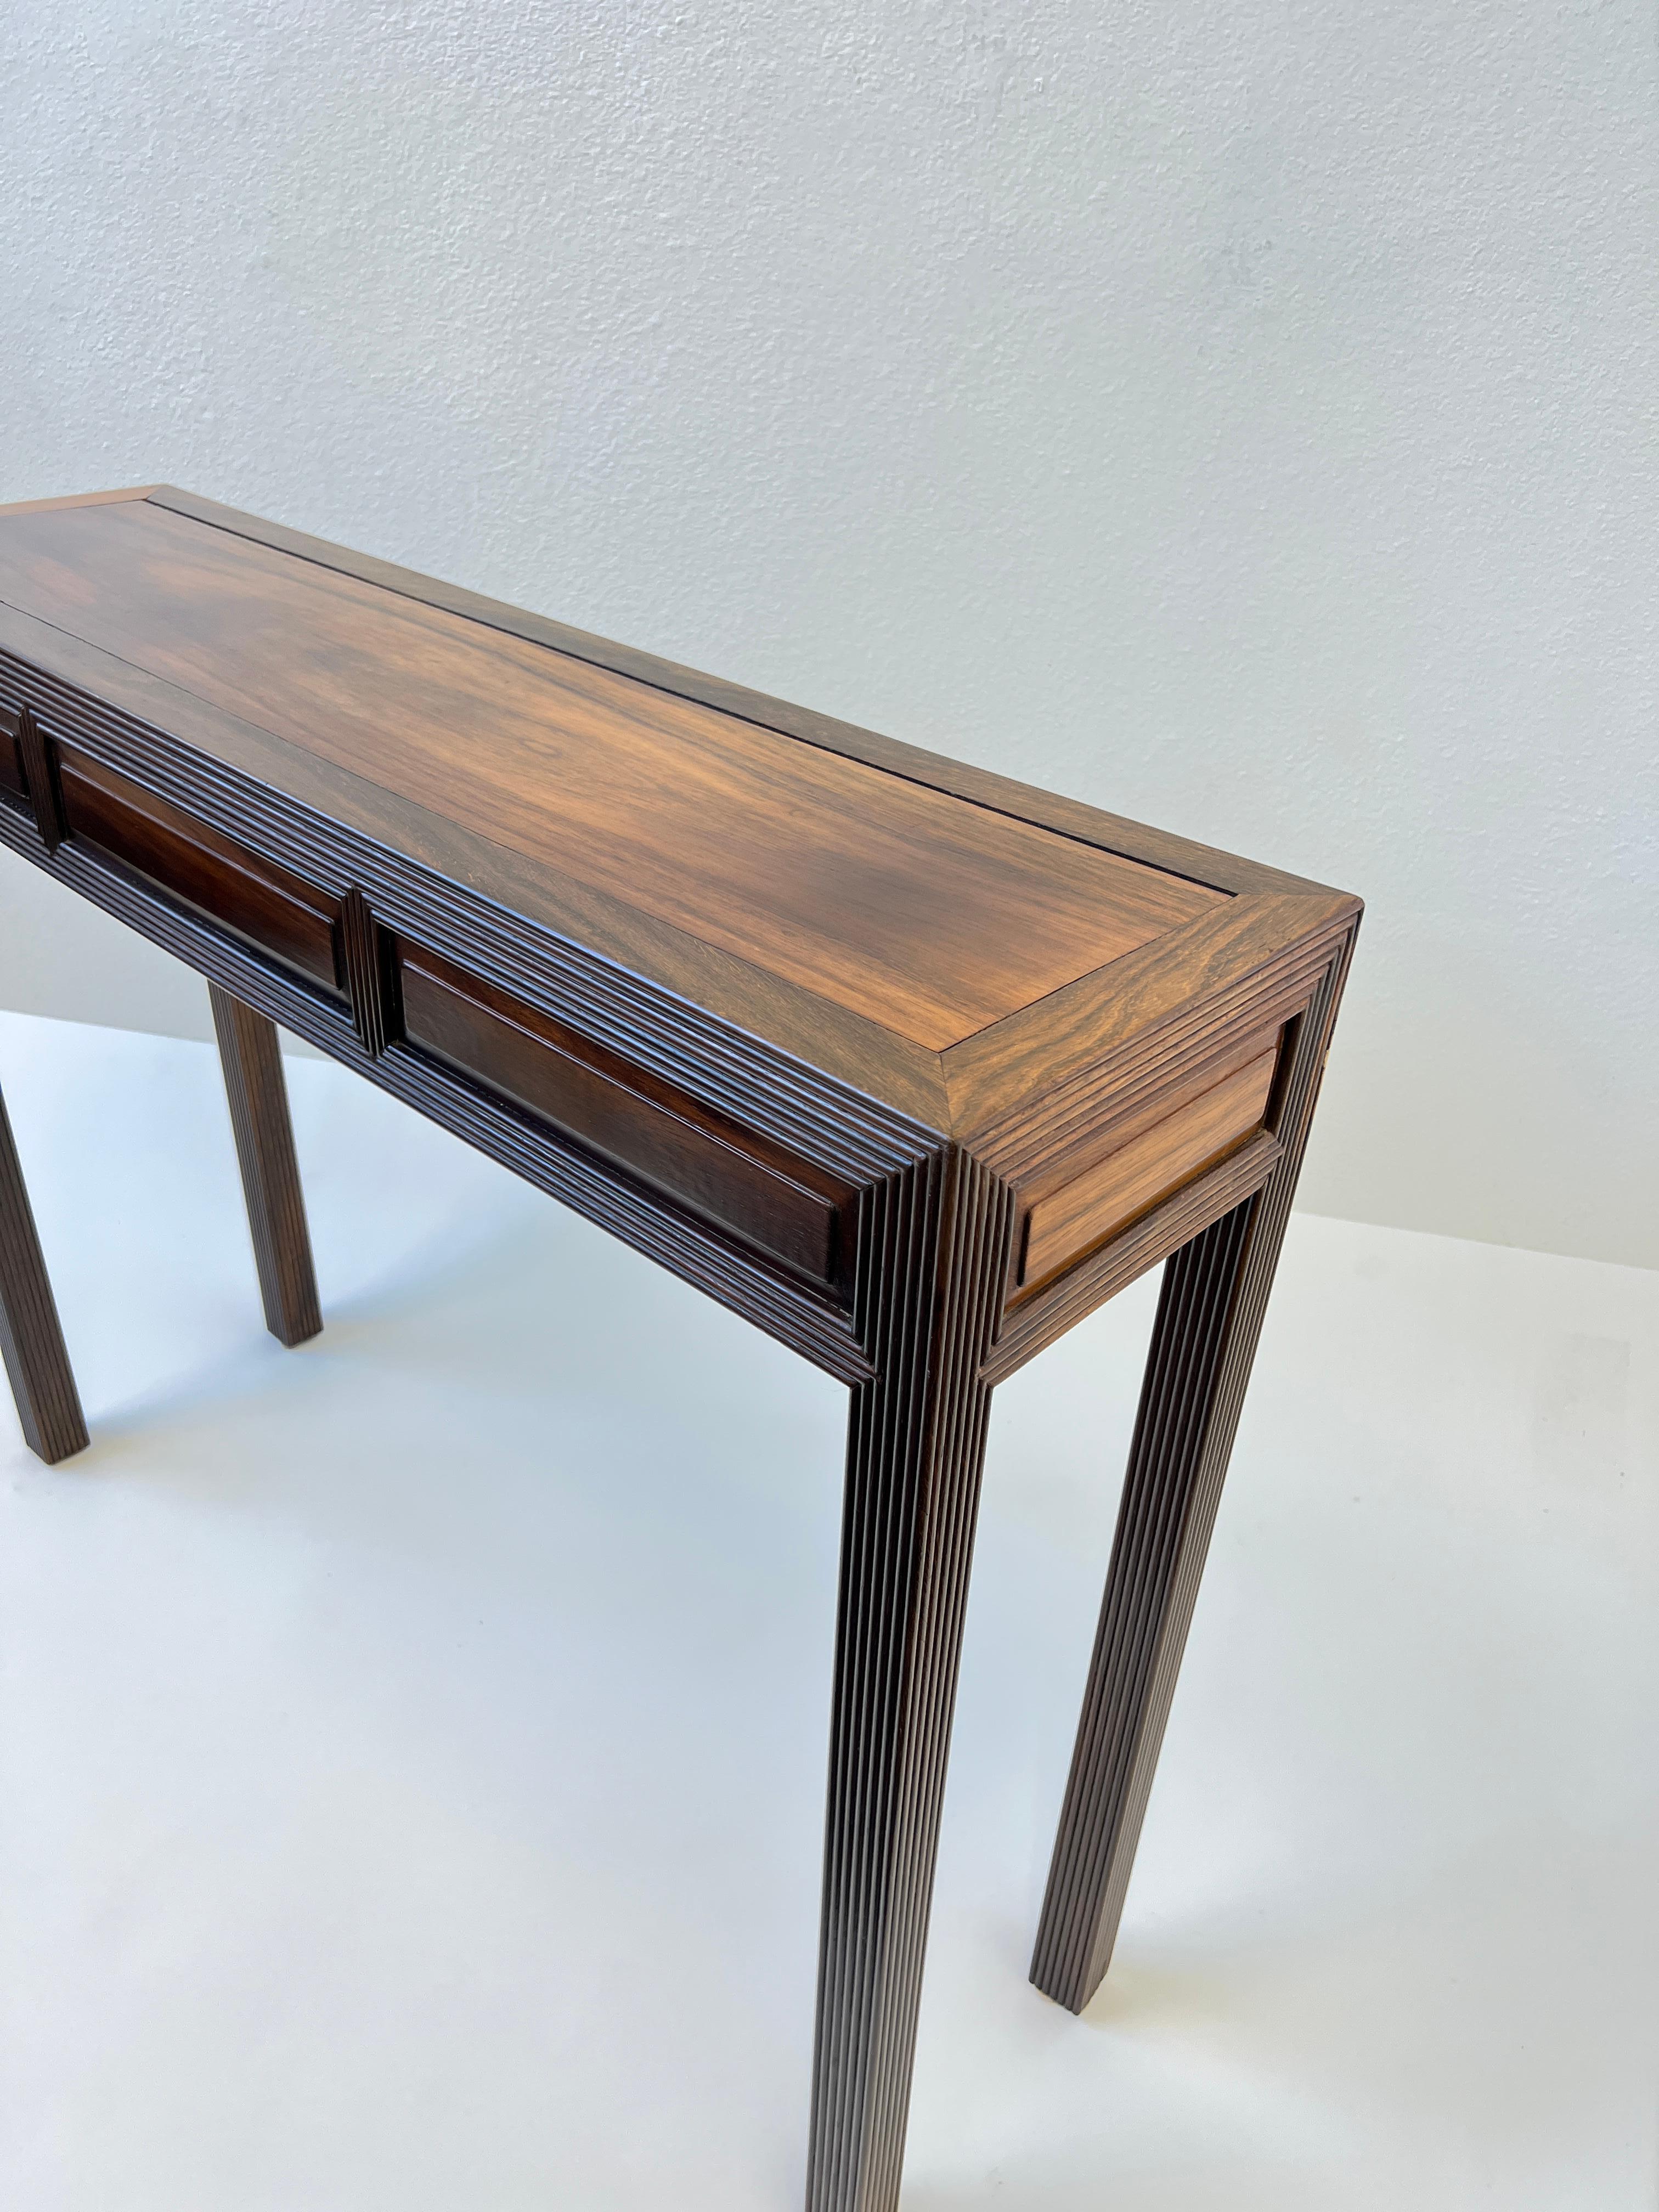 Solid Rosewood Console Table With Drawers  2